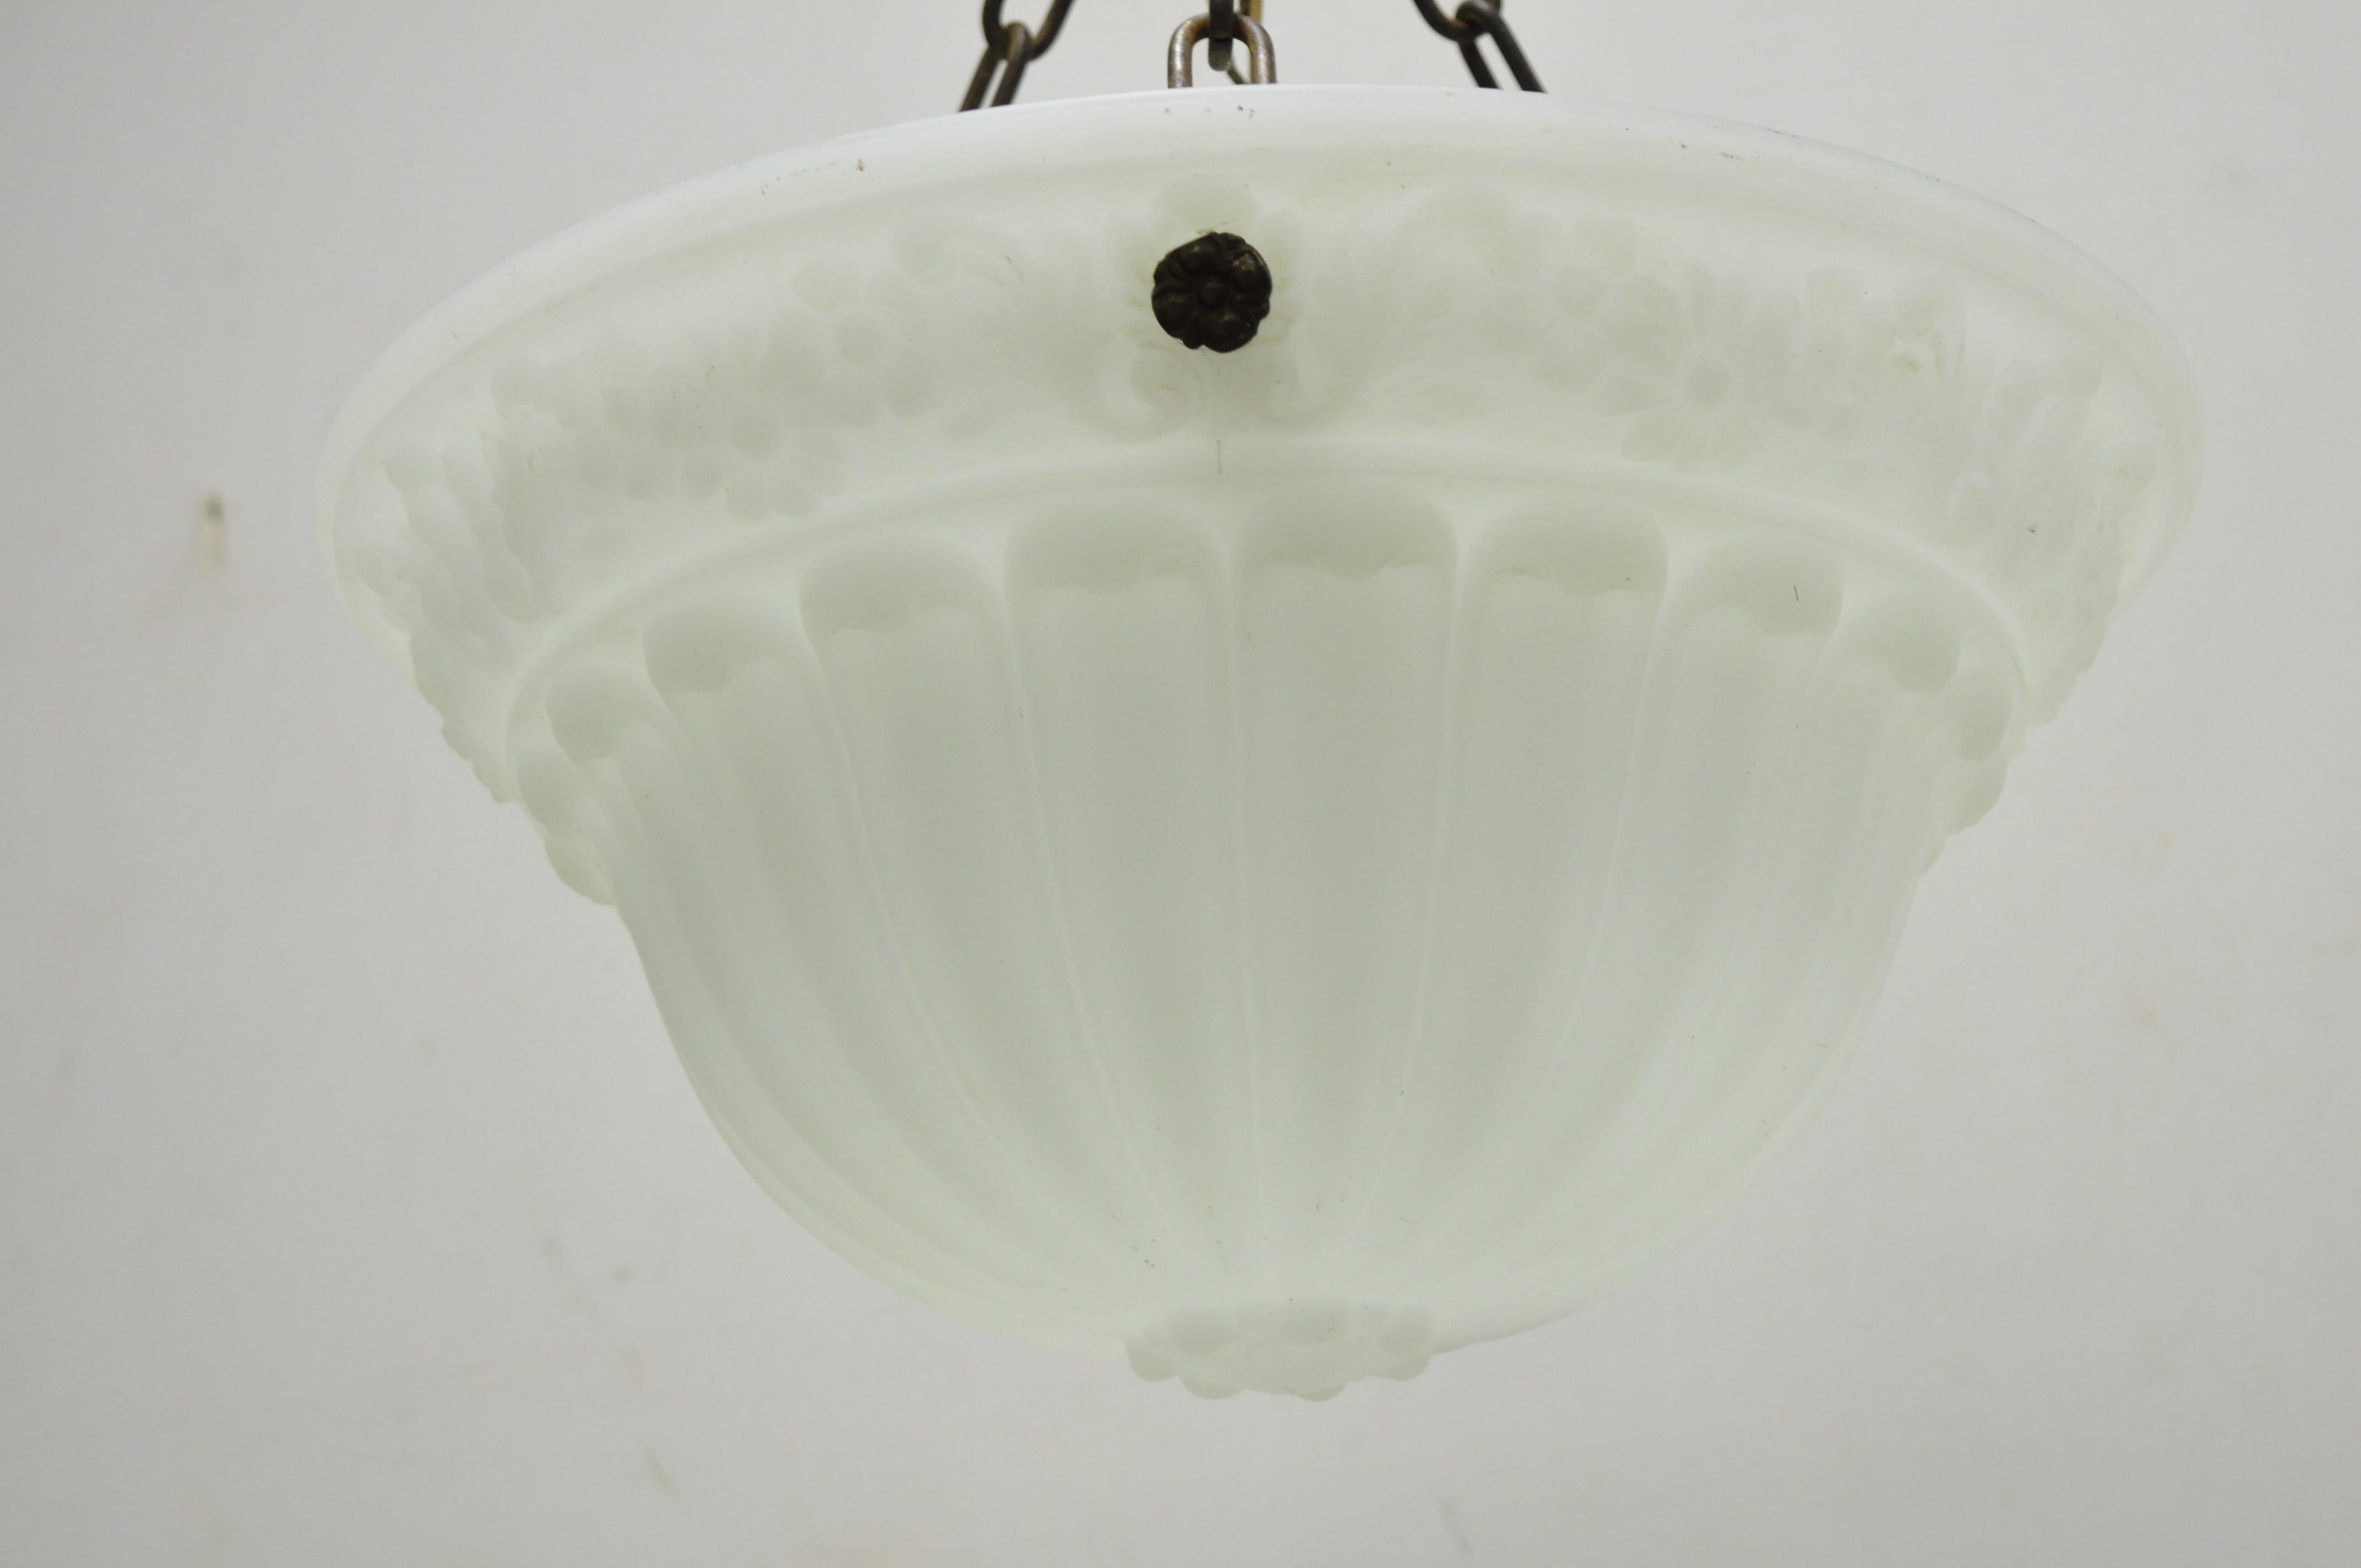 Antique white frosted glass Victorian dome hanging chandelier light fixture. Item features a single light socket, 3 chains, frosted glass, decorated dome, very nice antique item, circa early to mid-20th century. Measurements: 10